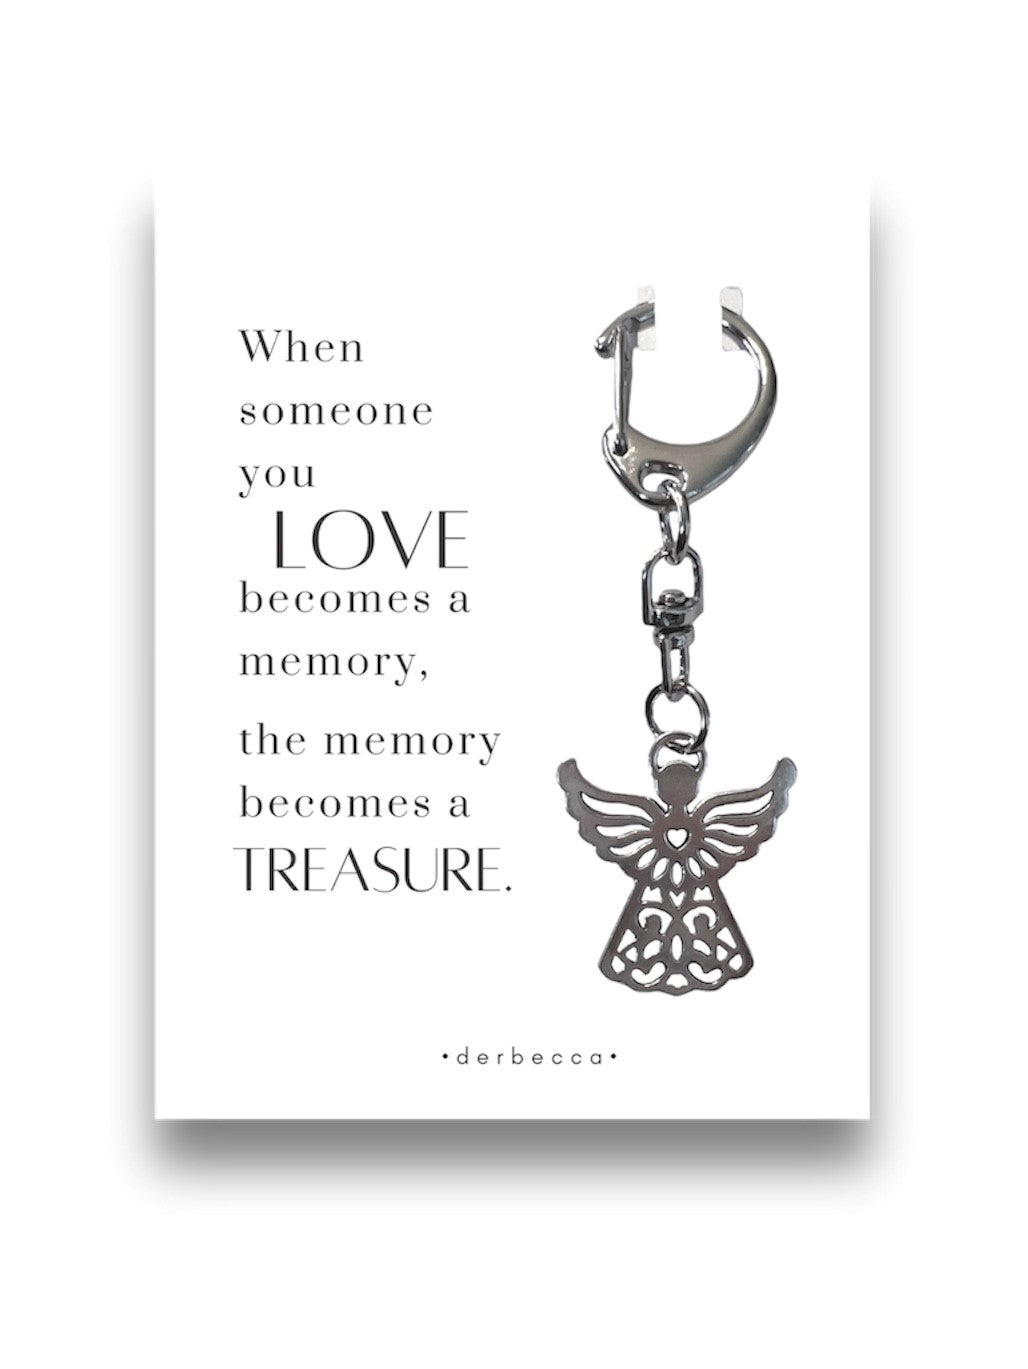 Angel Memory Mini Keychain Bag Charm Pendant for Sympathy, Loss, Passing Death of a Loved One with message/poem/verse that reads: When someone you LOVE becomes a memory, the memory becomes a TREASURE. Sad Memory Loss Gift